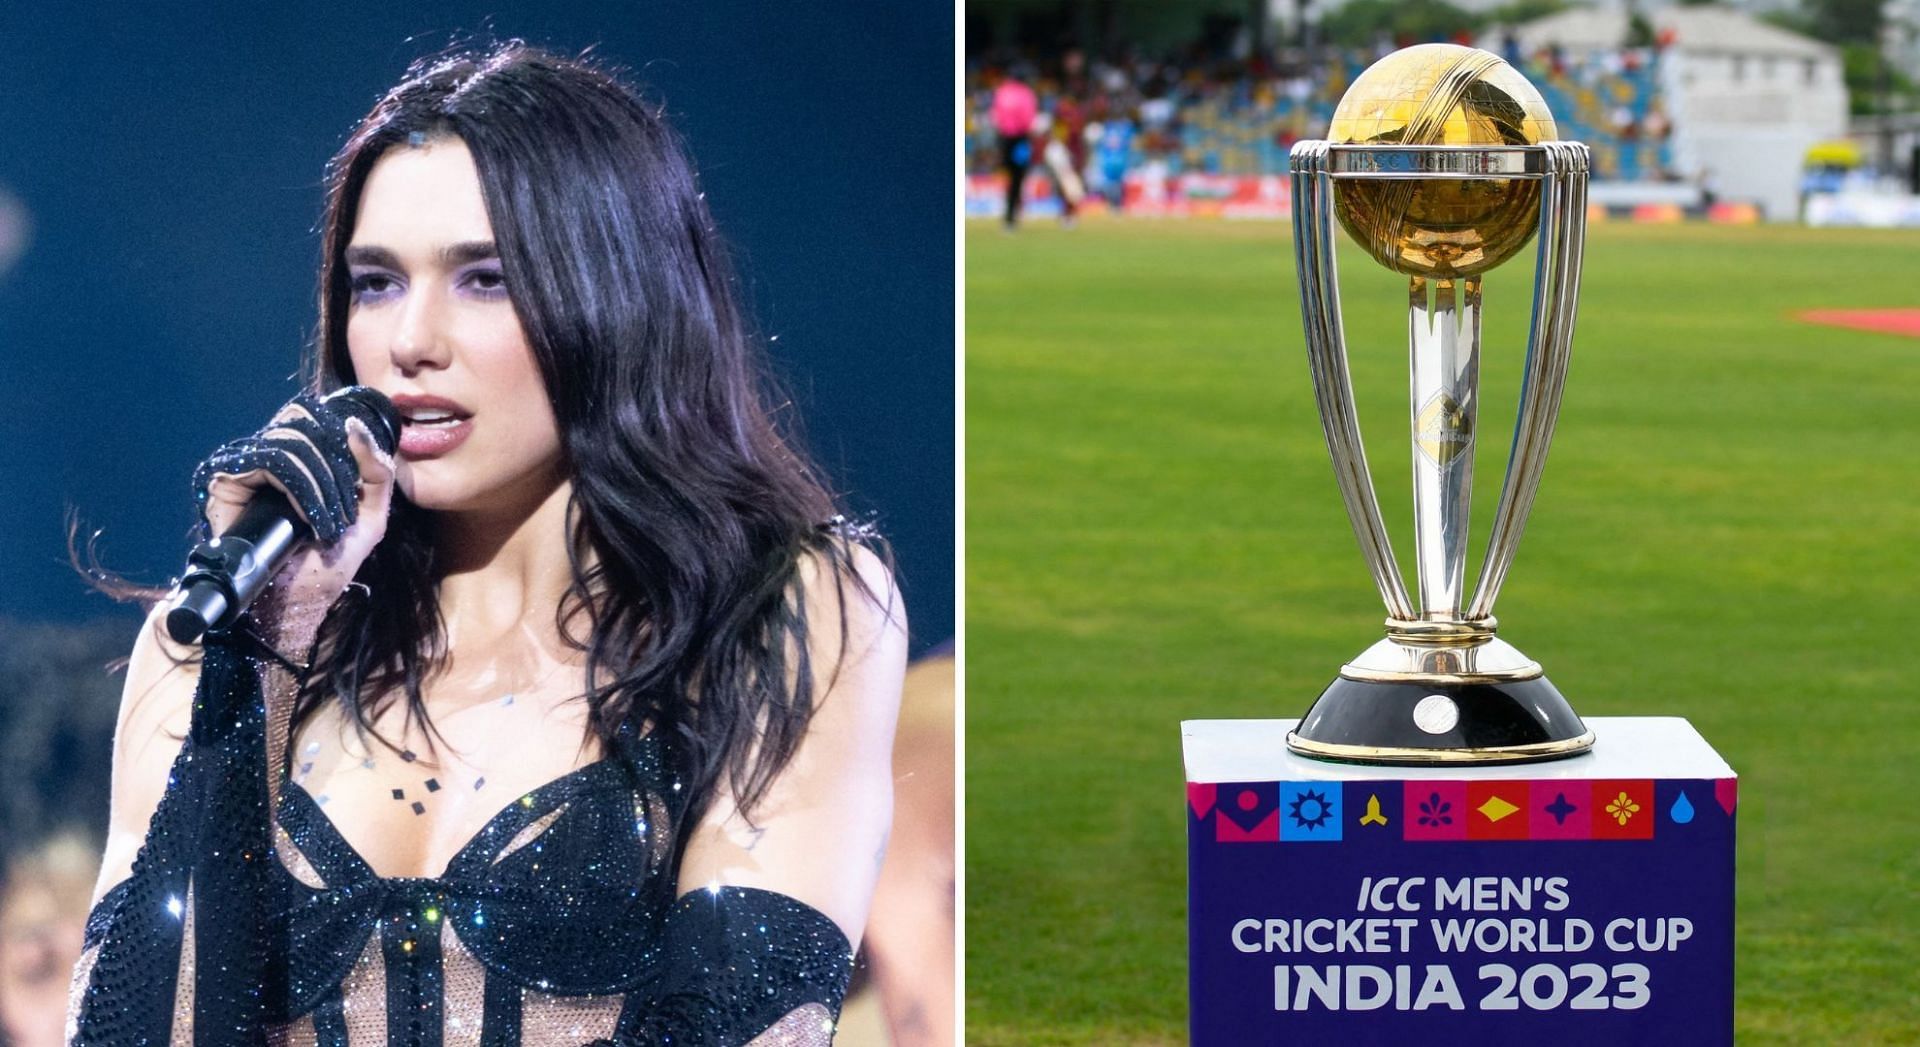 BCCI has released the World Cup Final Match Celebrations schdule